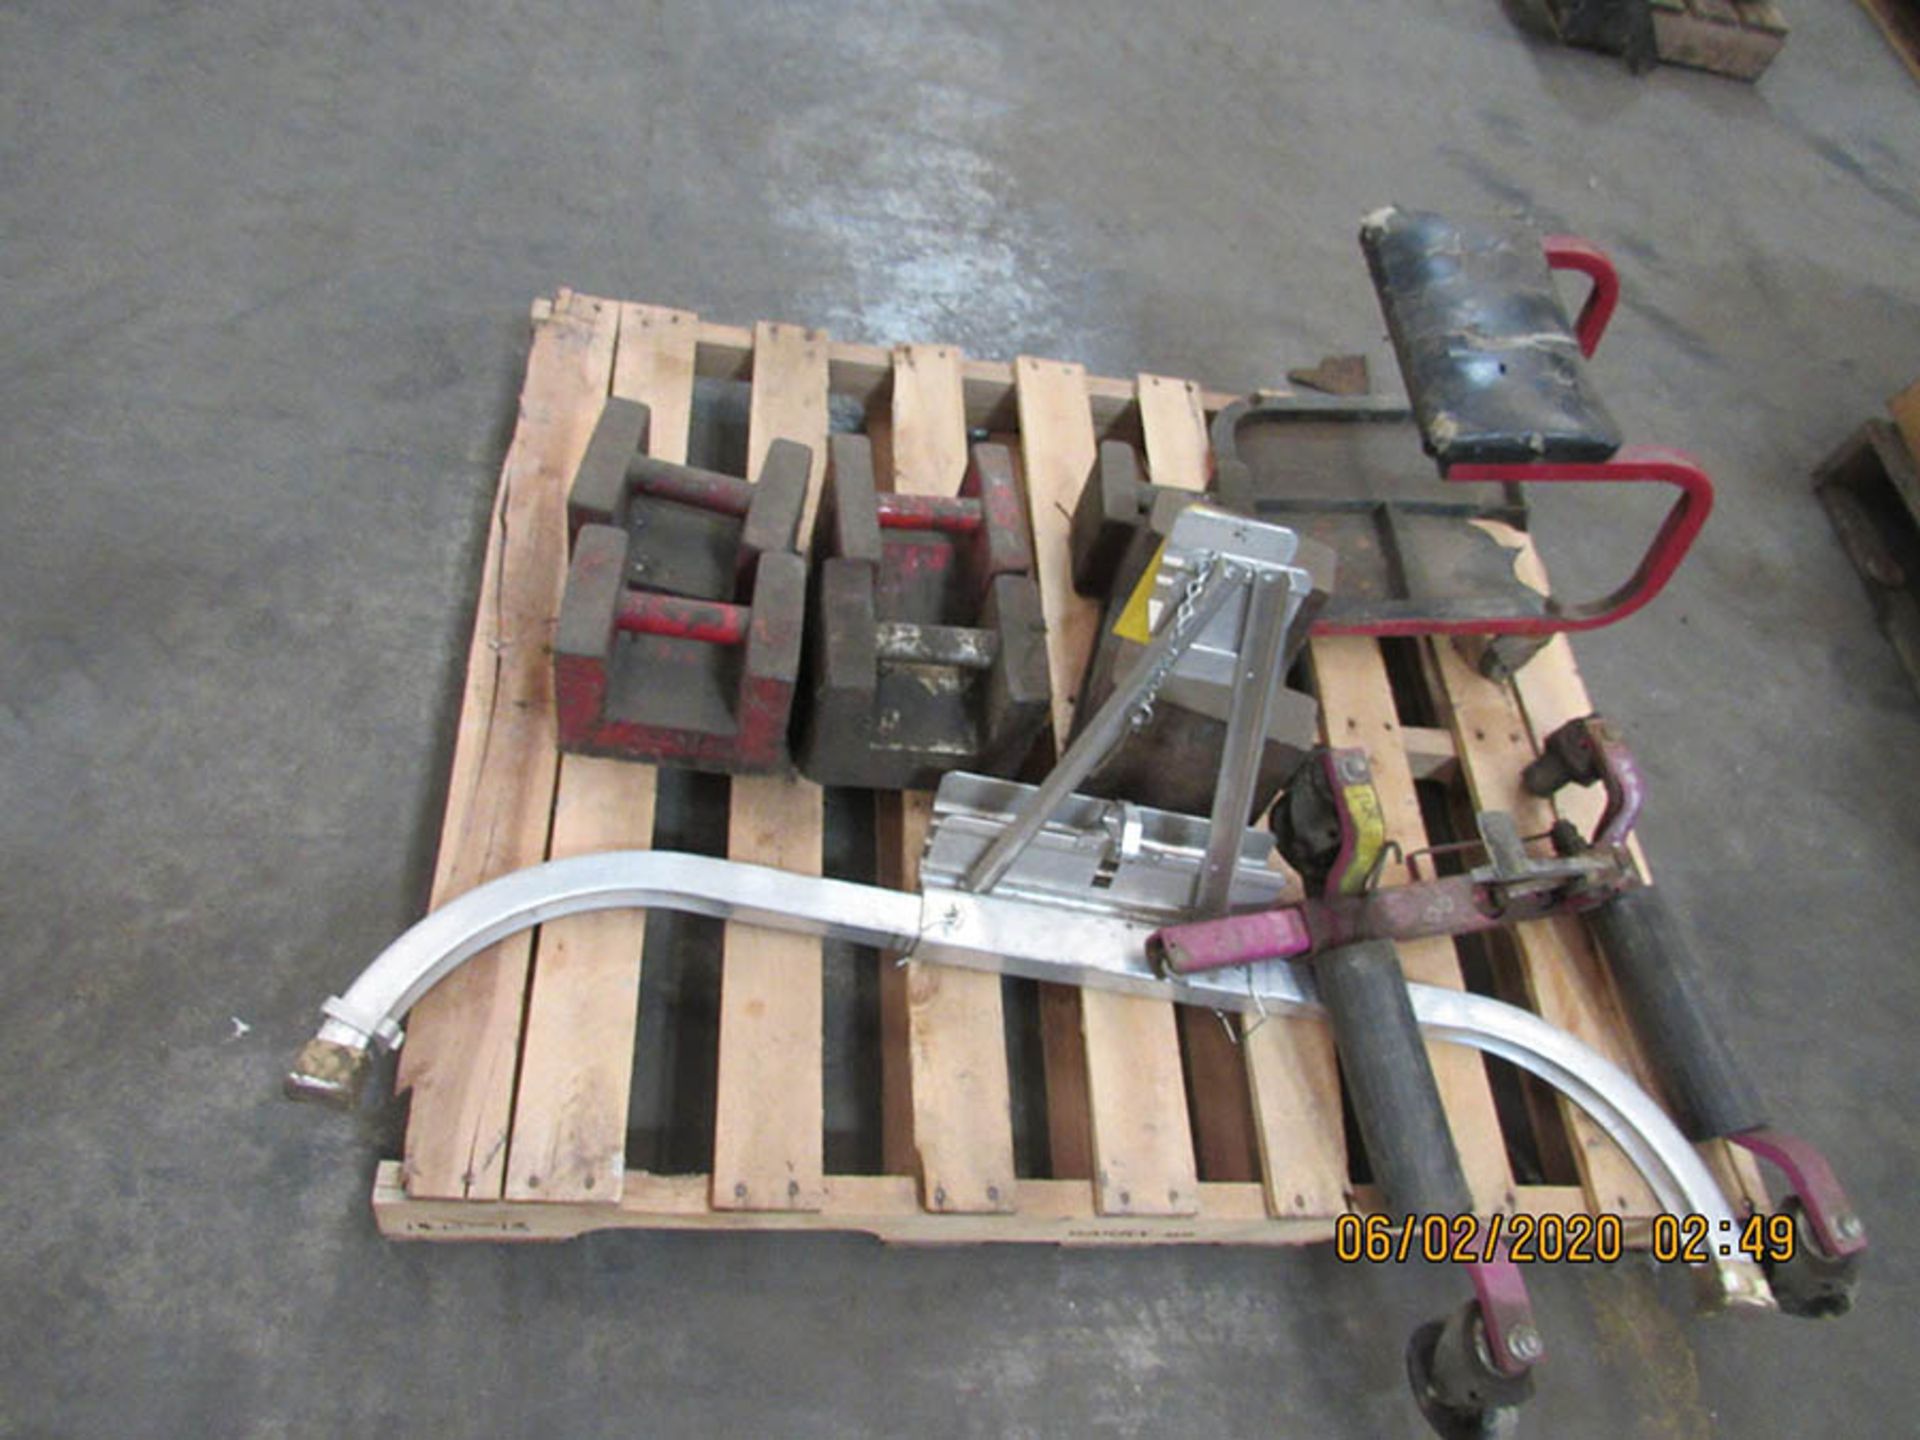 ASSORTED ELECTRIC MOTORS, VACUUM PUMPS, CHAINSAWS, 50-LB. WEIGHTS, 100-LB AND 25-LB, CRAFTSMAN TOOLS - Image 3 of 16